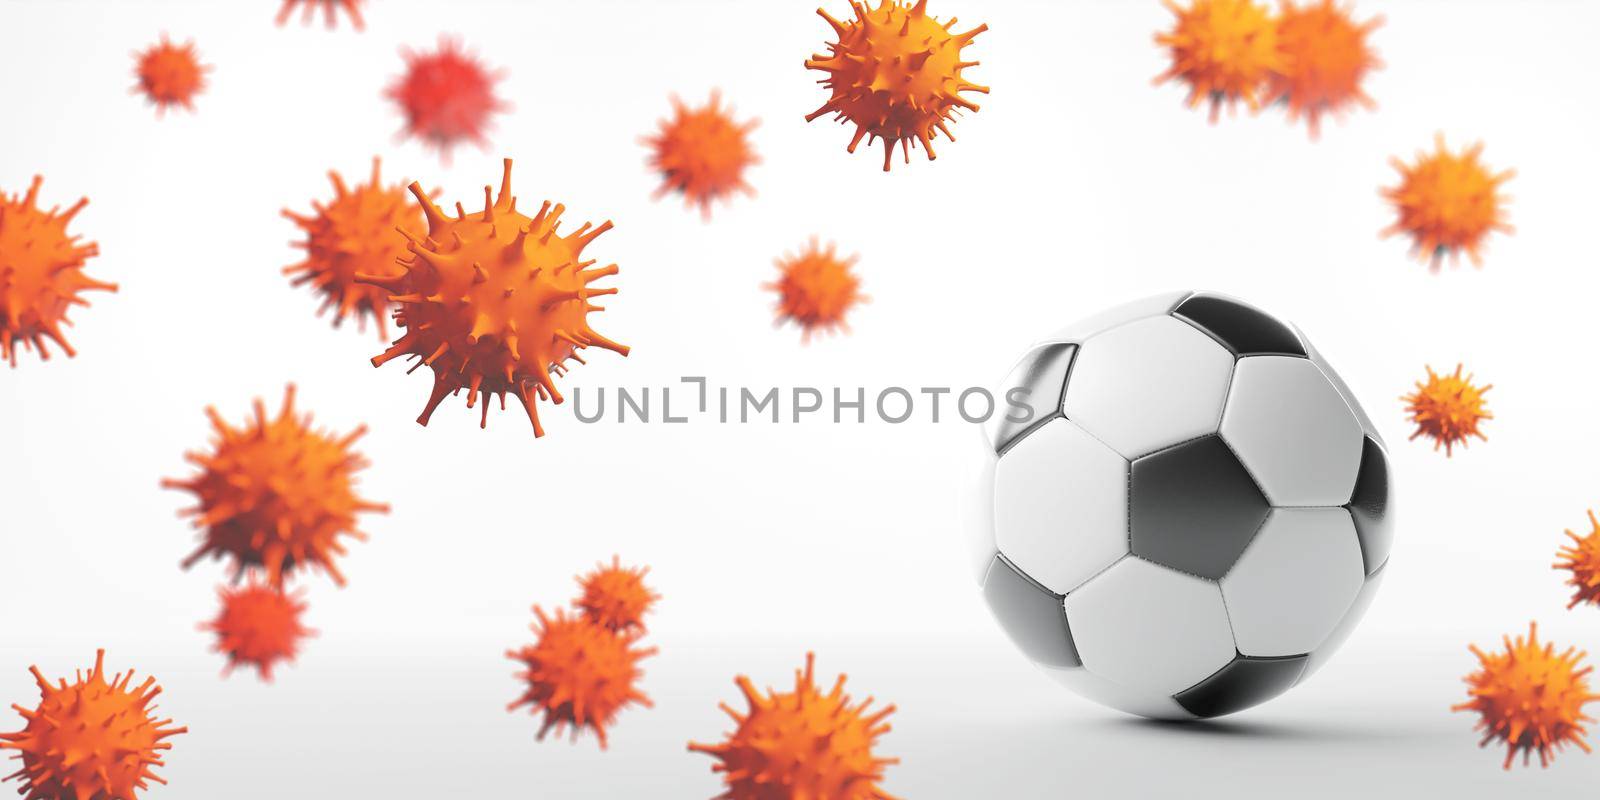 Soccer events through the corona virus time by Taut